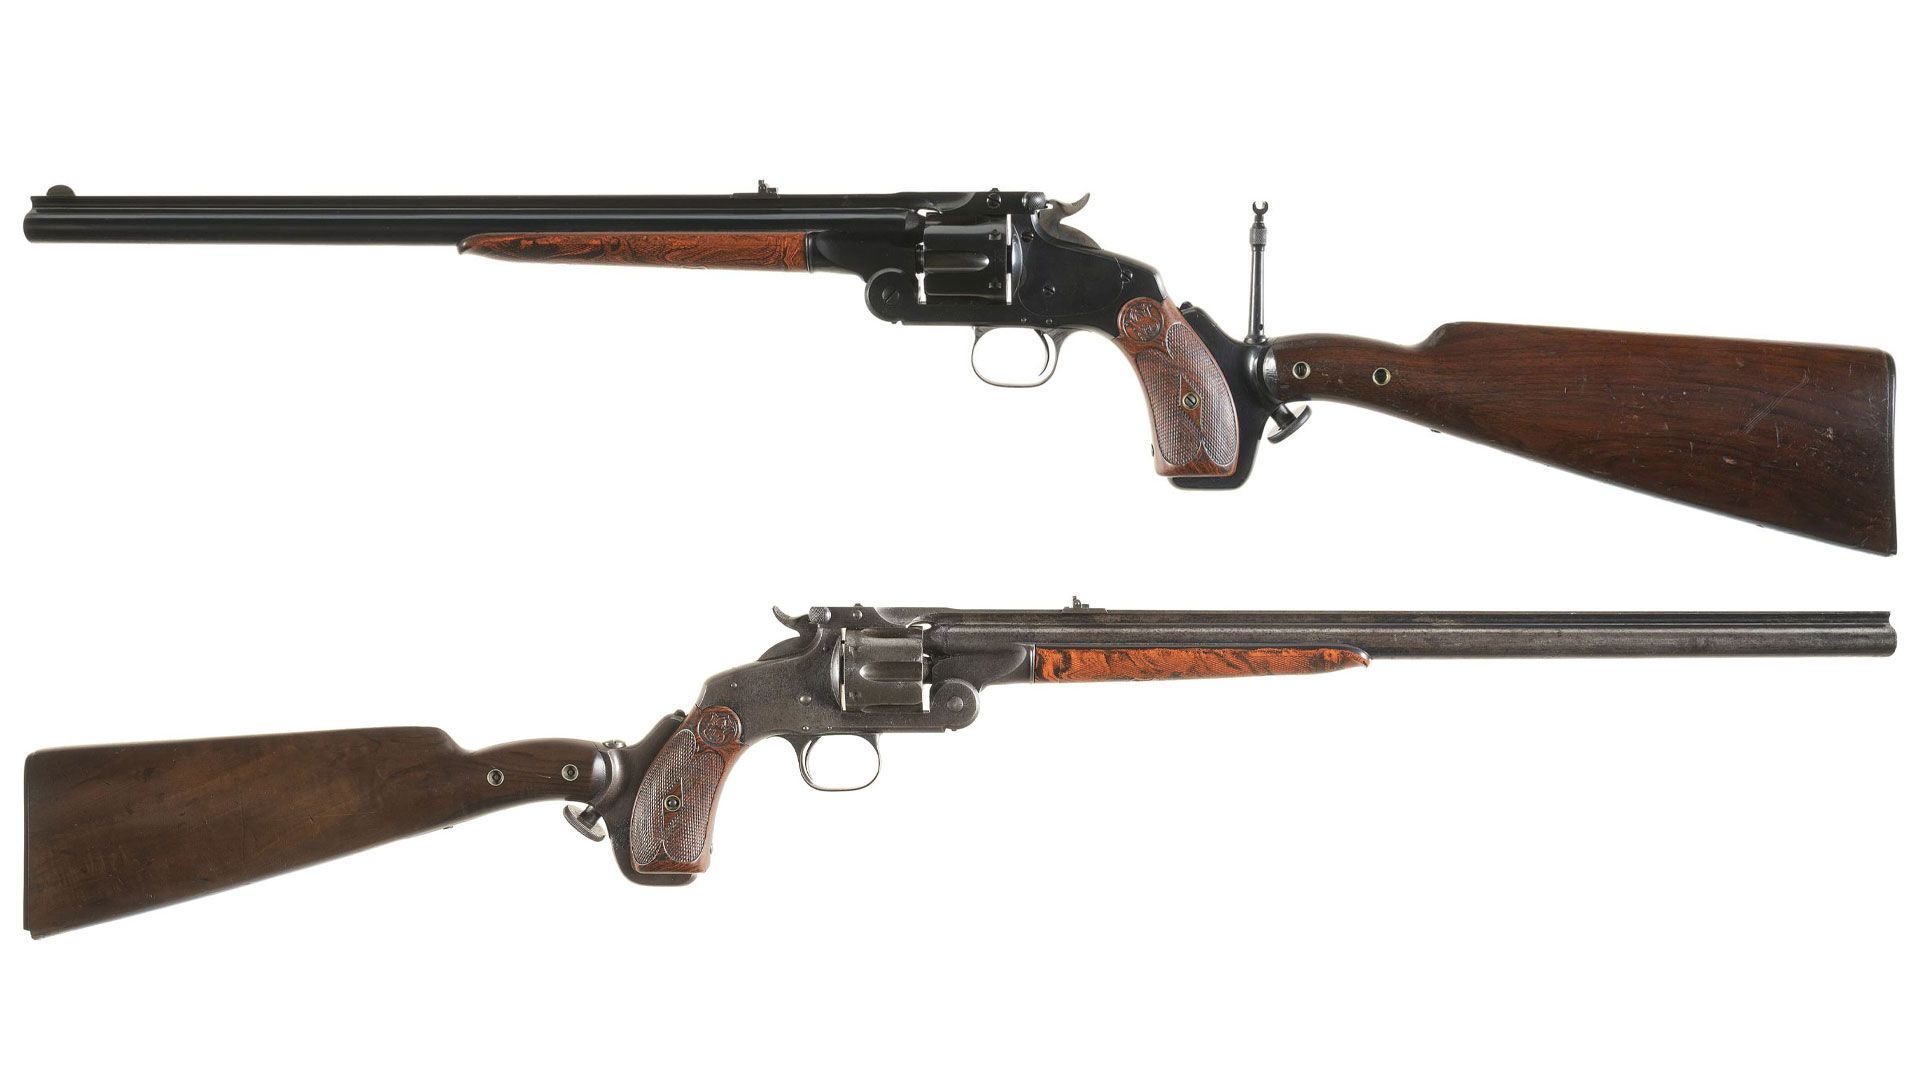 Smith-and-Wesson-revolving-rifles